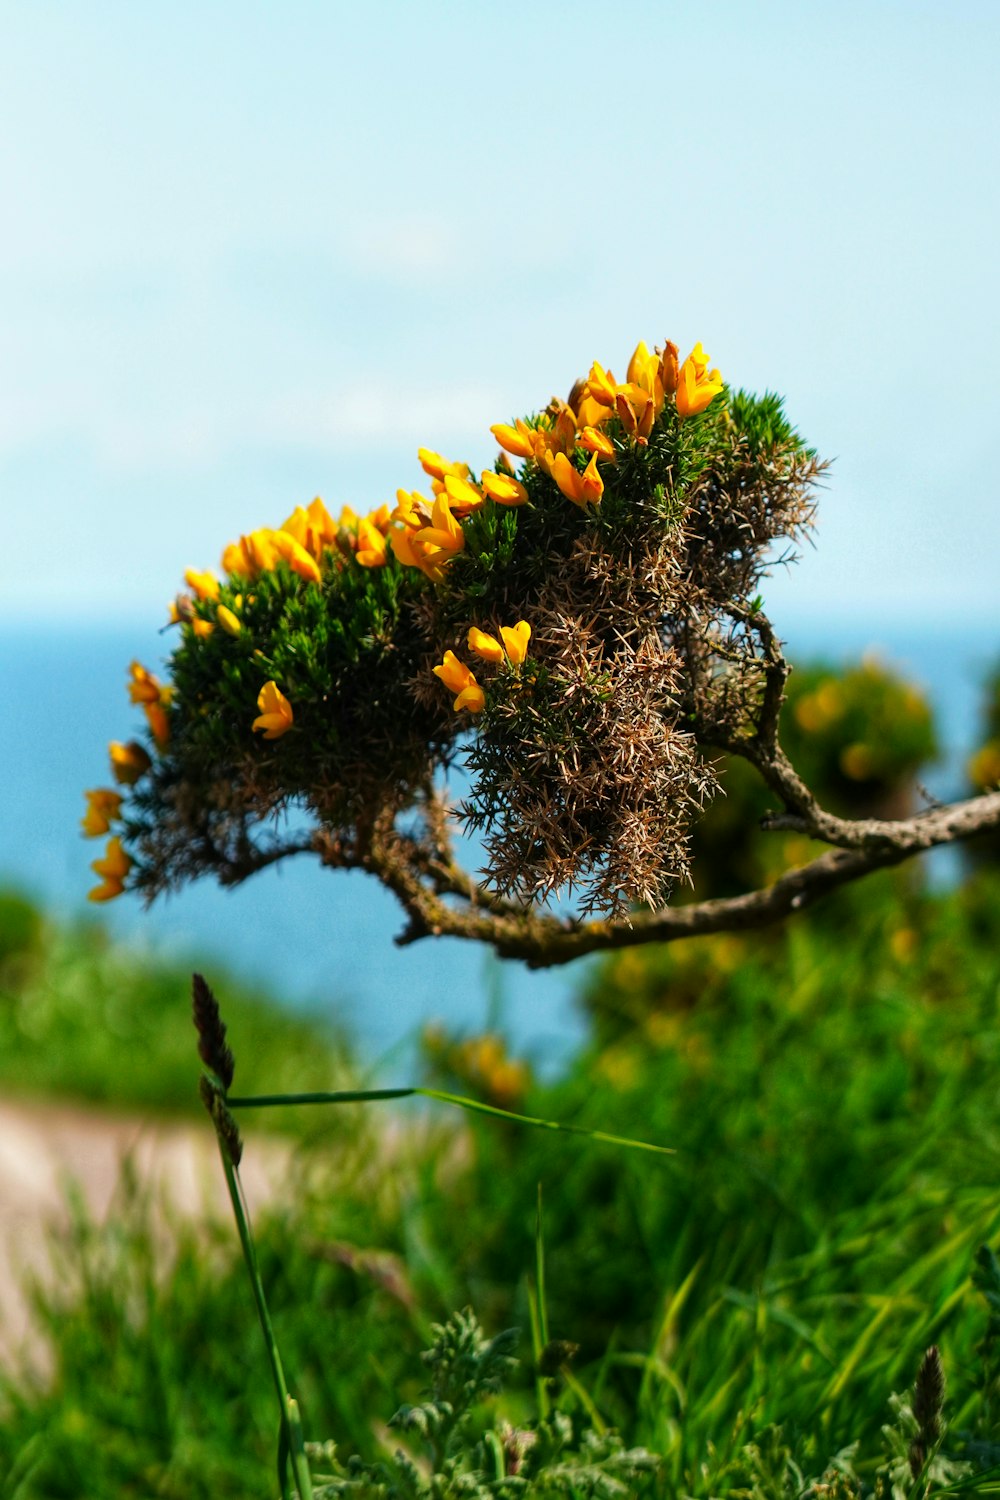 a tree branch with yellow flowers growing on it